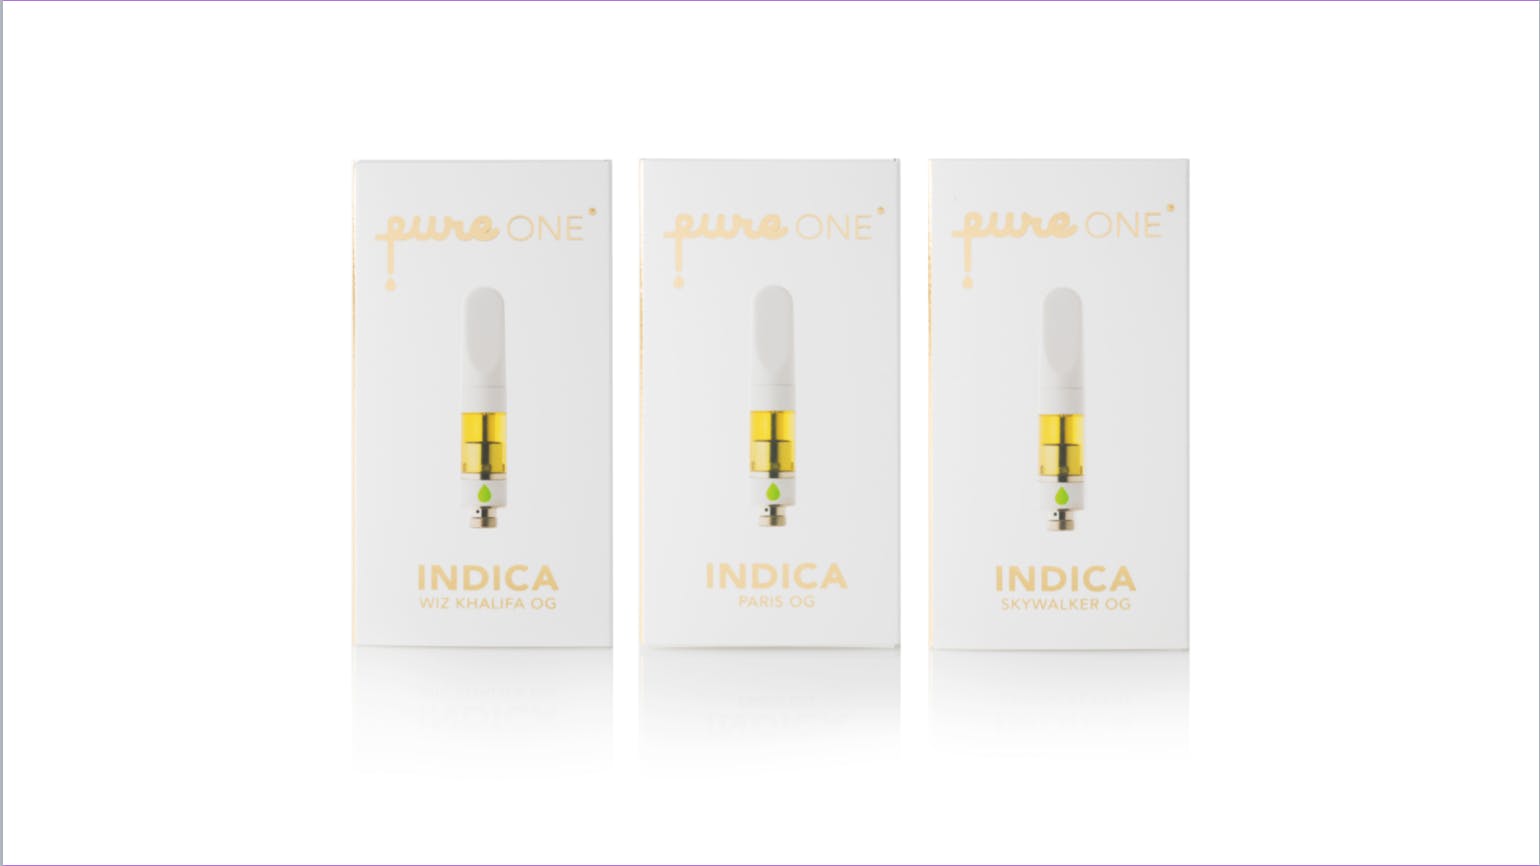 concentrate-indica-pureone-co2-cartridges